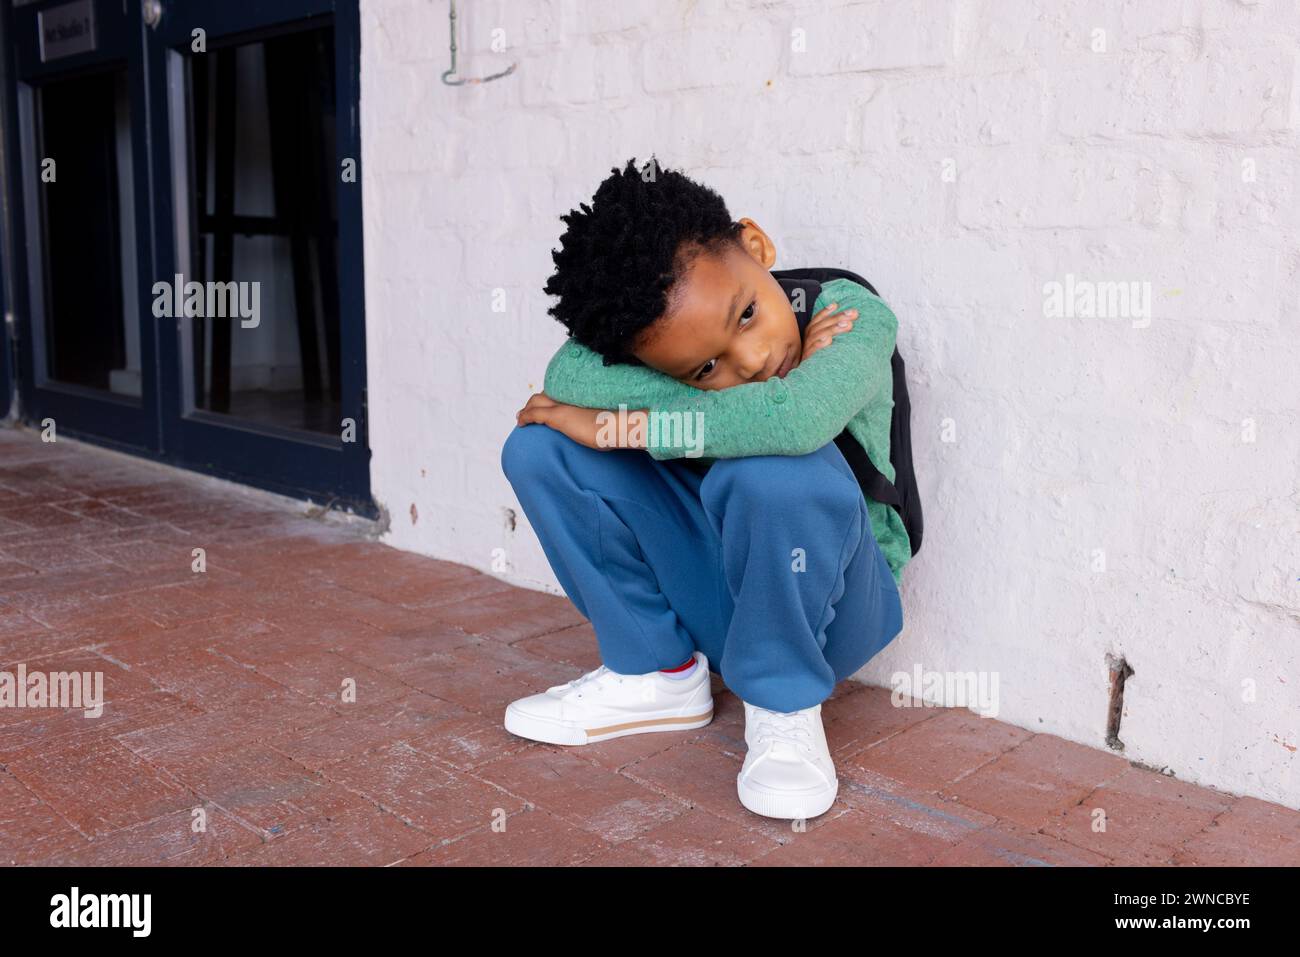 African American boy sits on the ground at school, looking sad Stock Photo